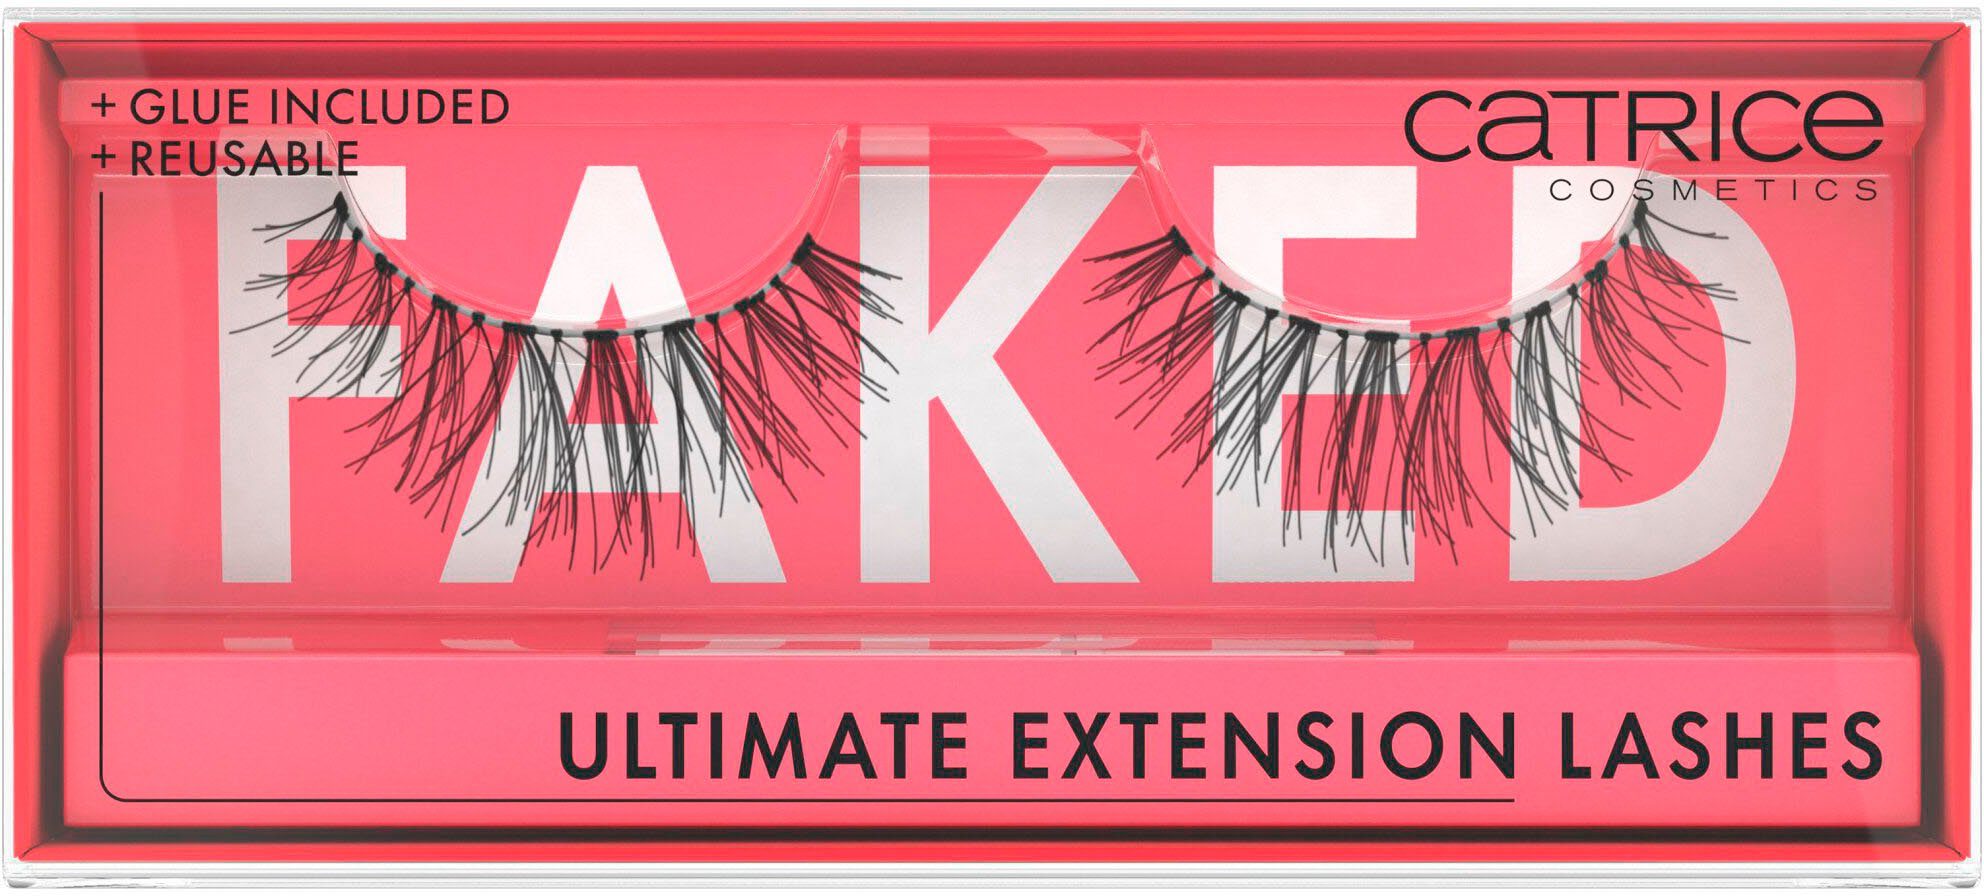 3 Set, Extension Lashes, Faked Ultimate Catrice Bandwimpern